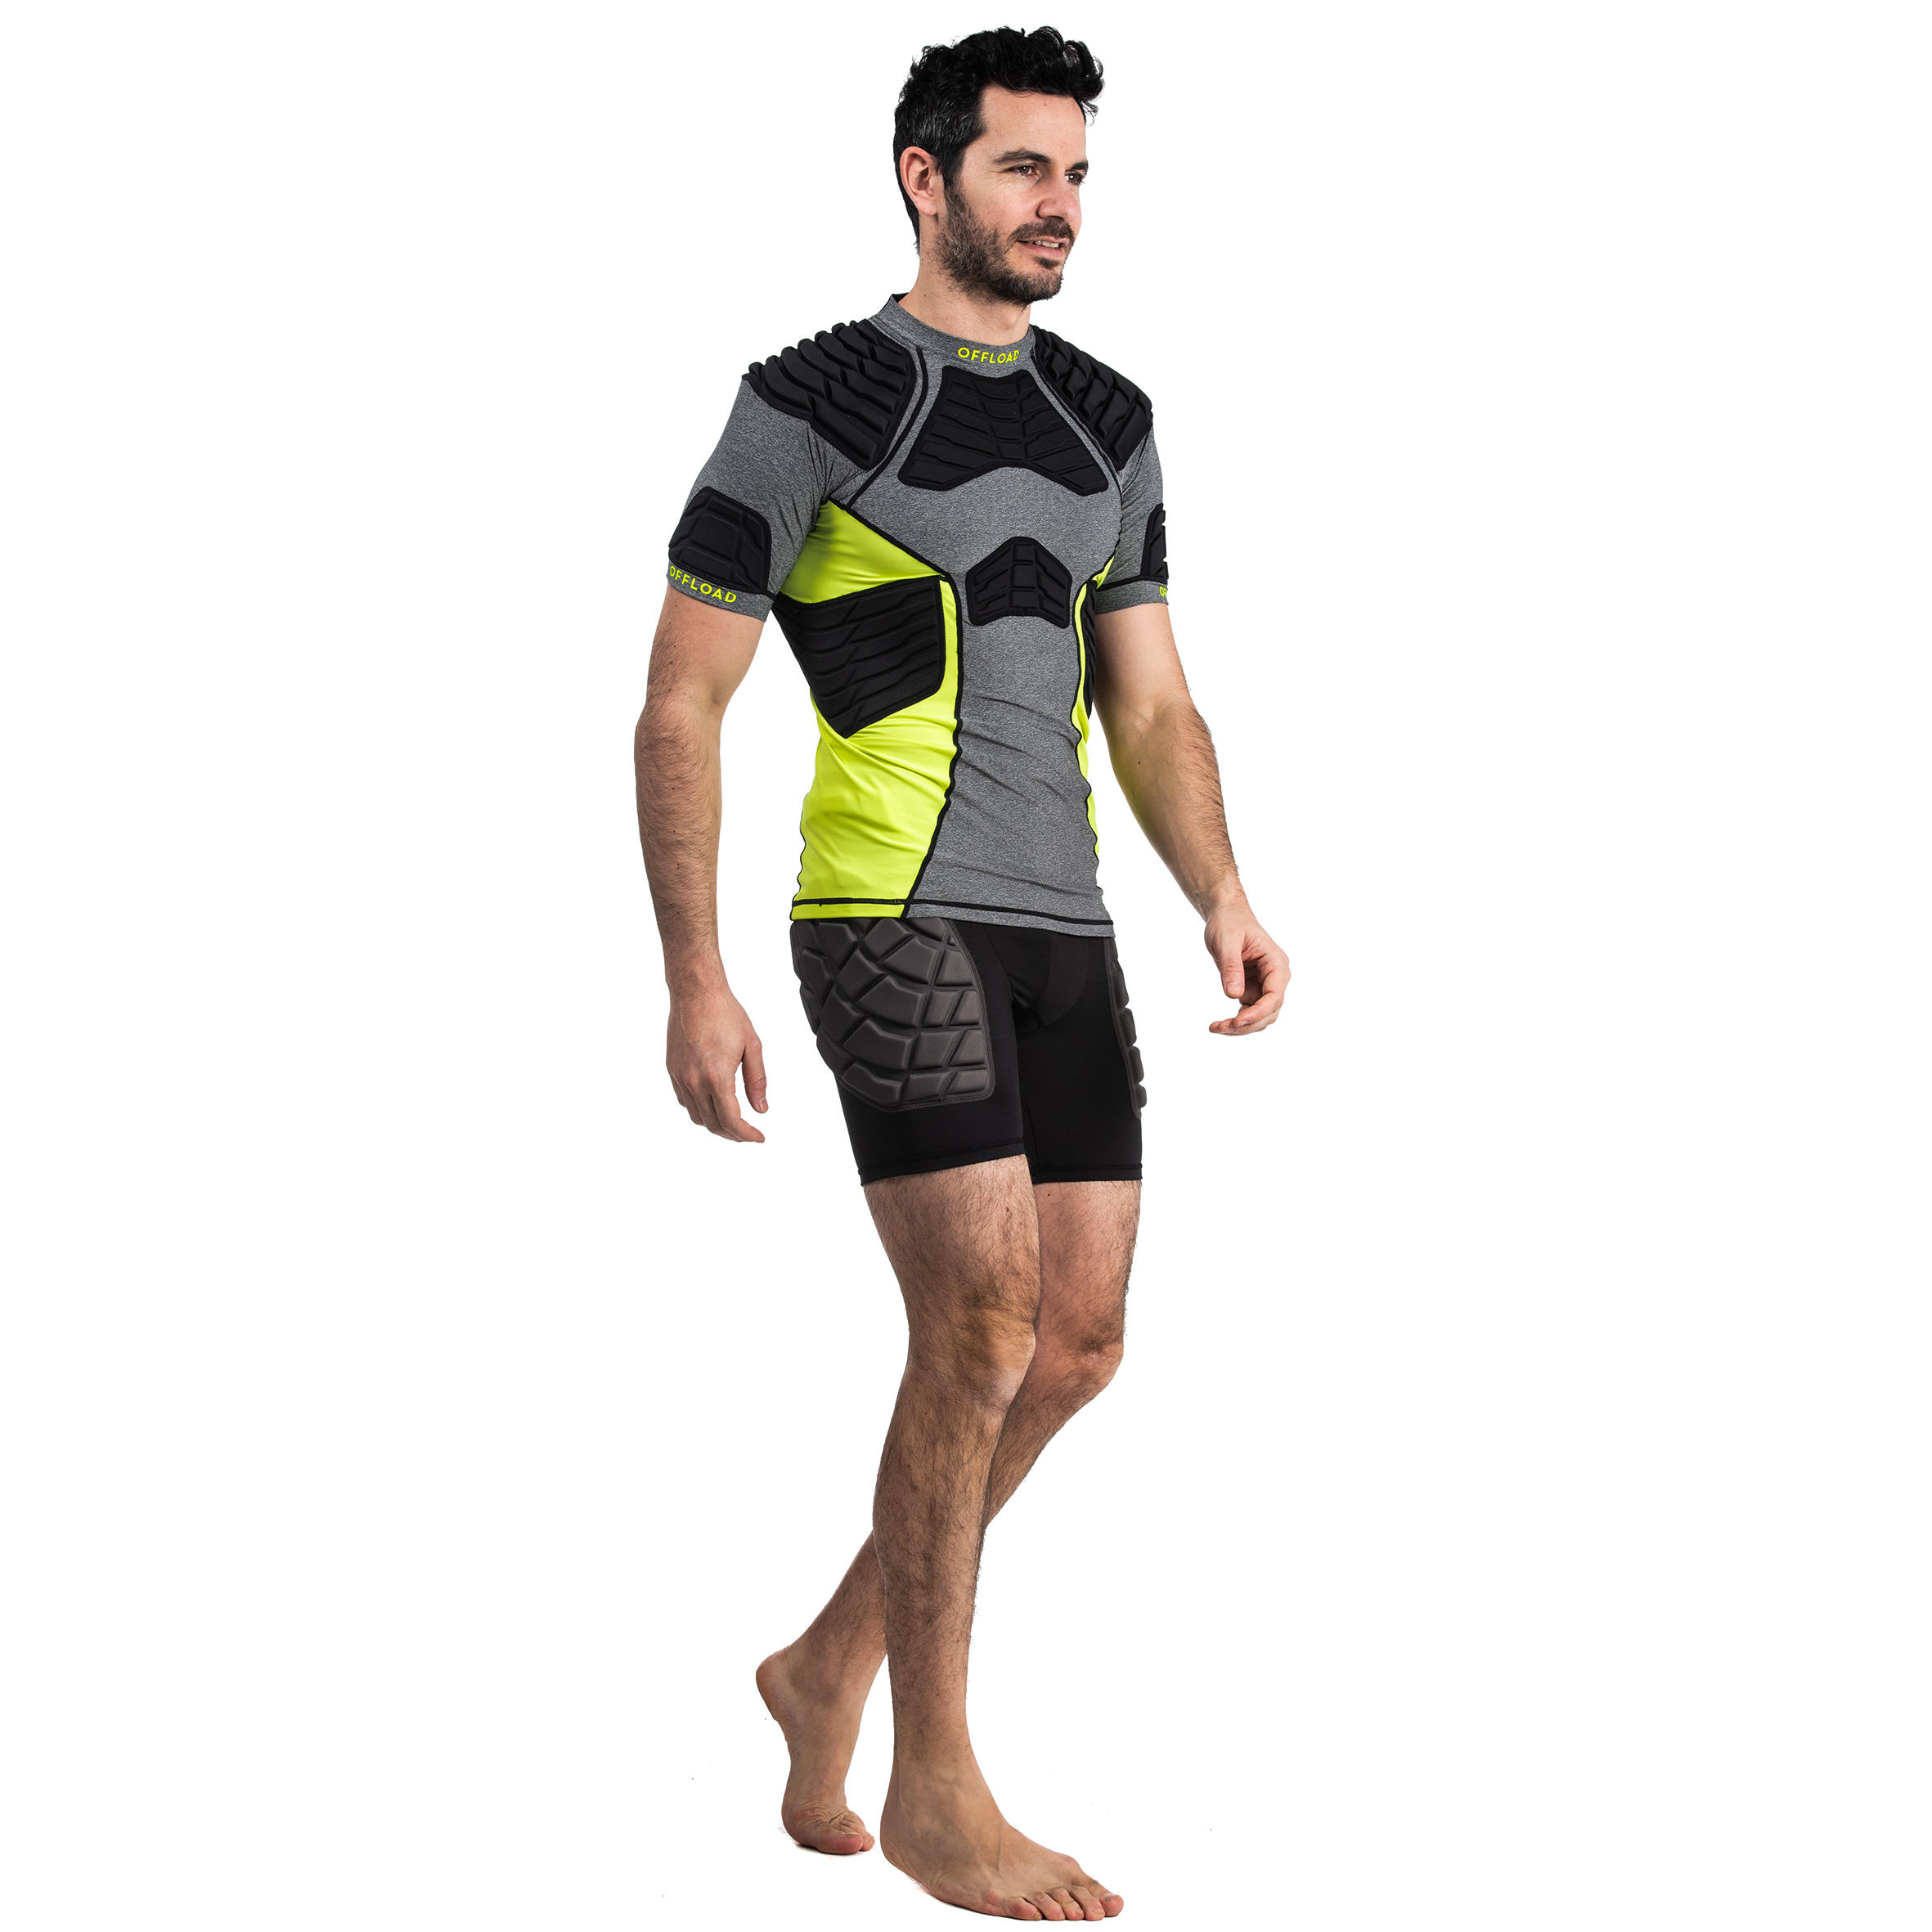 Men's Protective Rugby Undershorts R500 - Black/Yellow 5/9